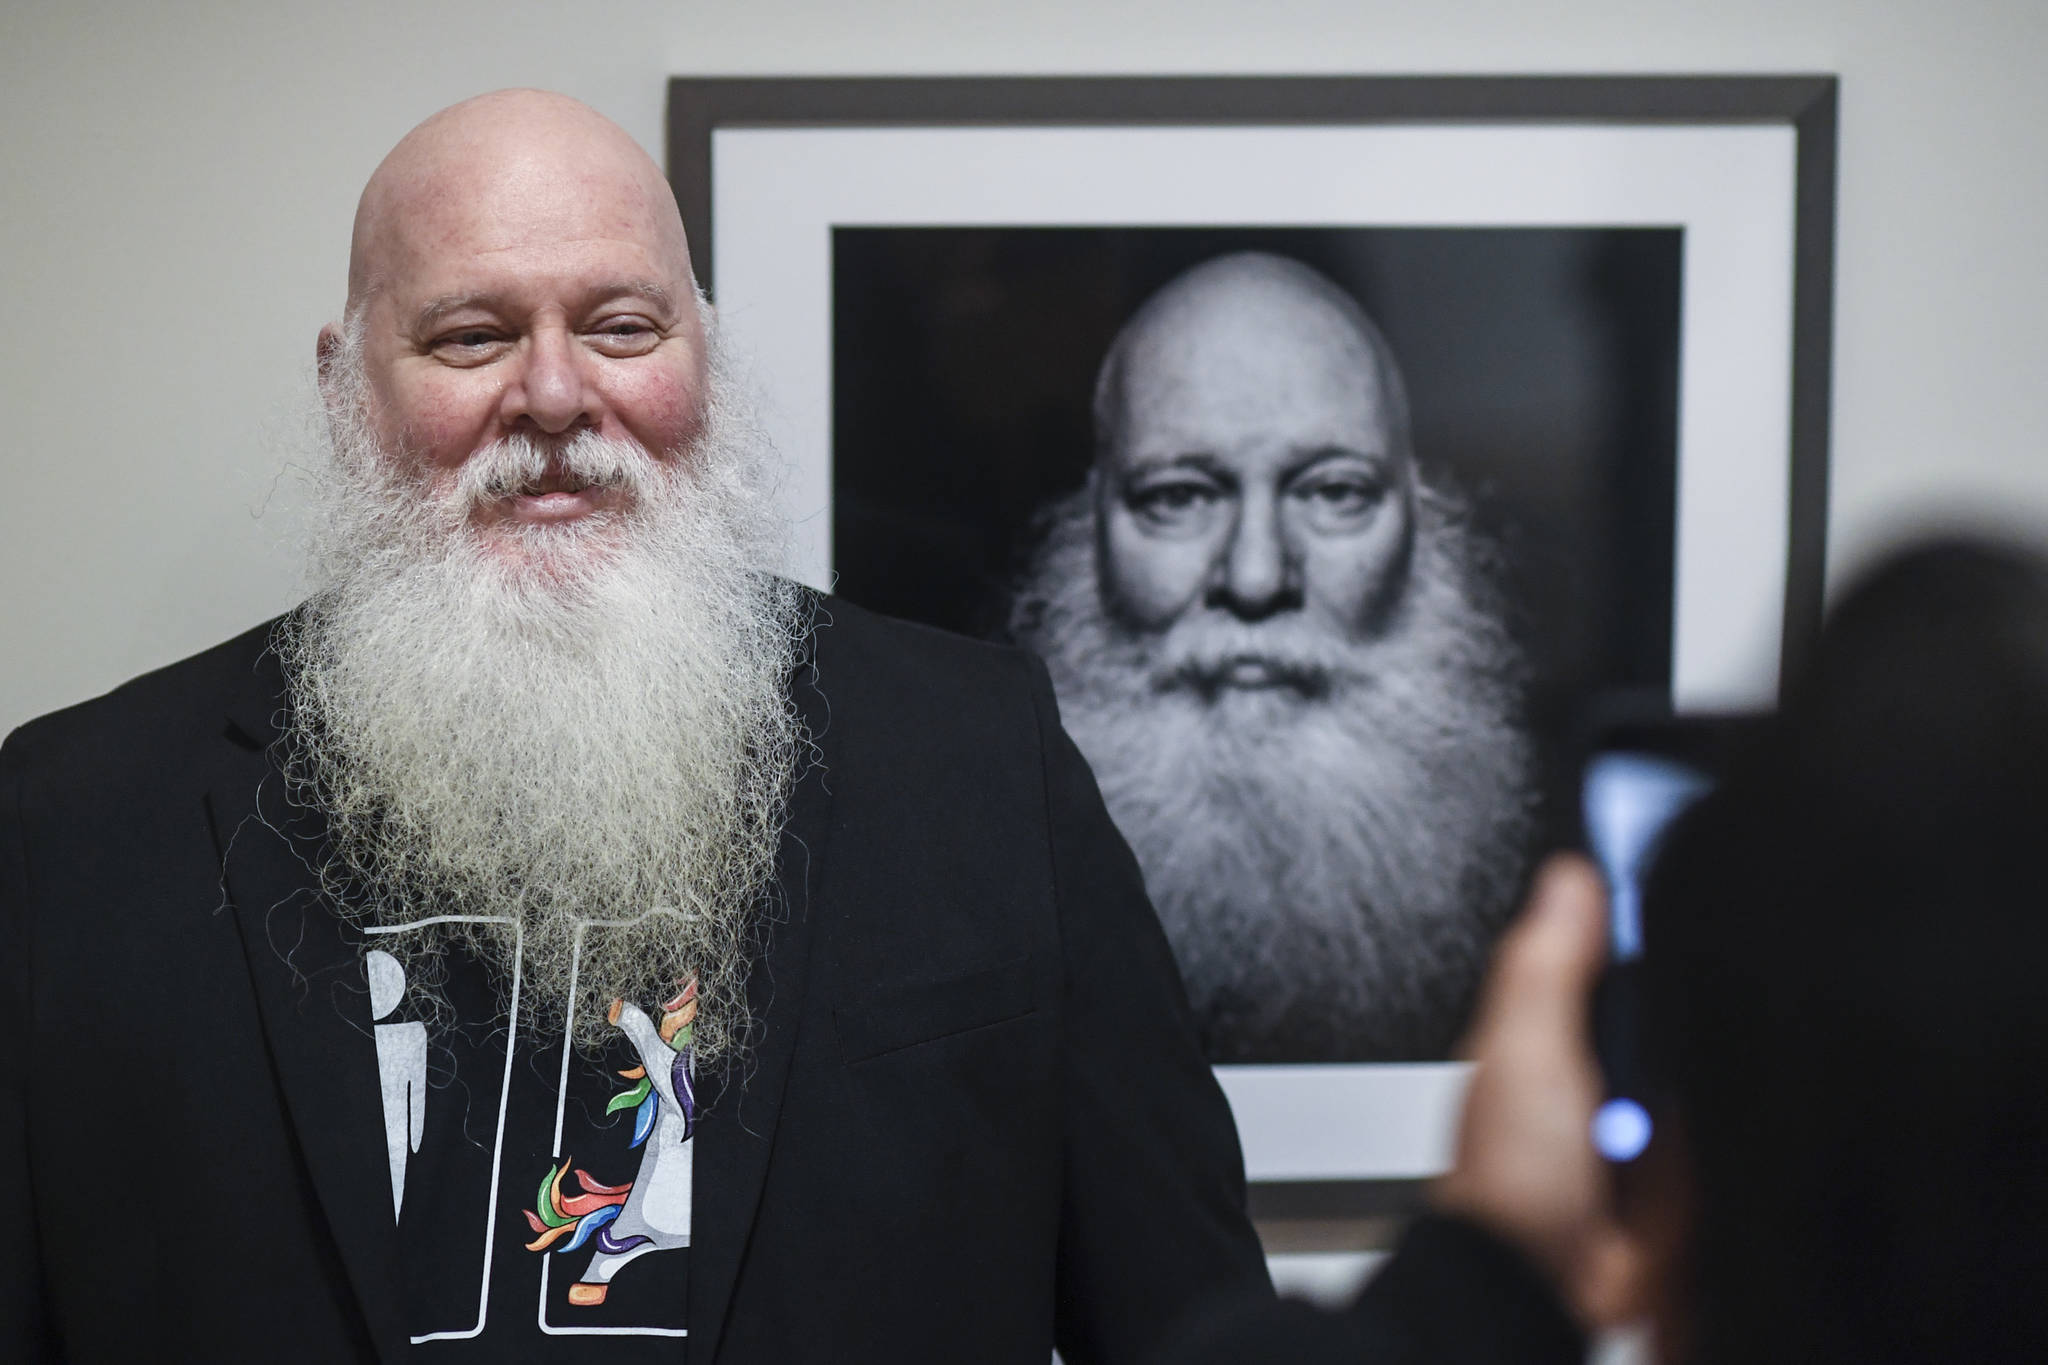 Mike Gates of Ketchikan has his picture taken by friend Dan Dawson in front of his self portrait at the Alaska Positive juried photography exhibit at the Alaska State Museum during Gallery Walk on Friday, Dec. 6, 2019. Gates received an Award of Recognition for his self portrait. (Michael Penn | Juneau Empire)